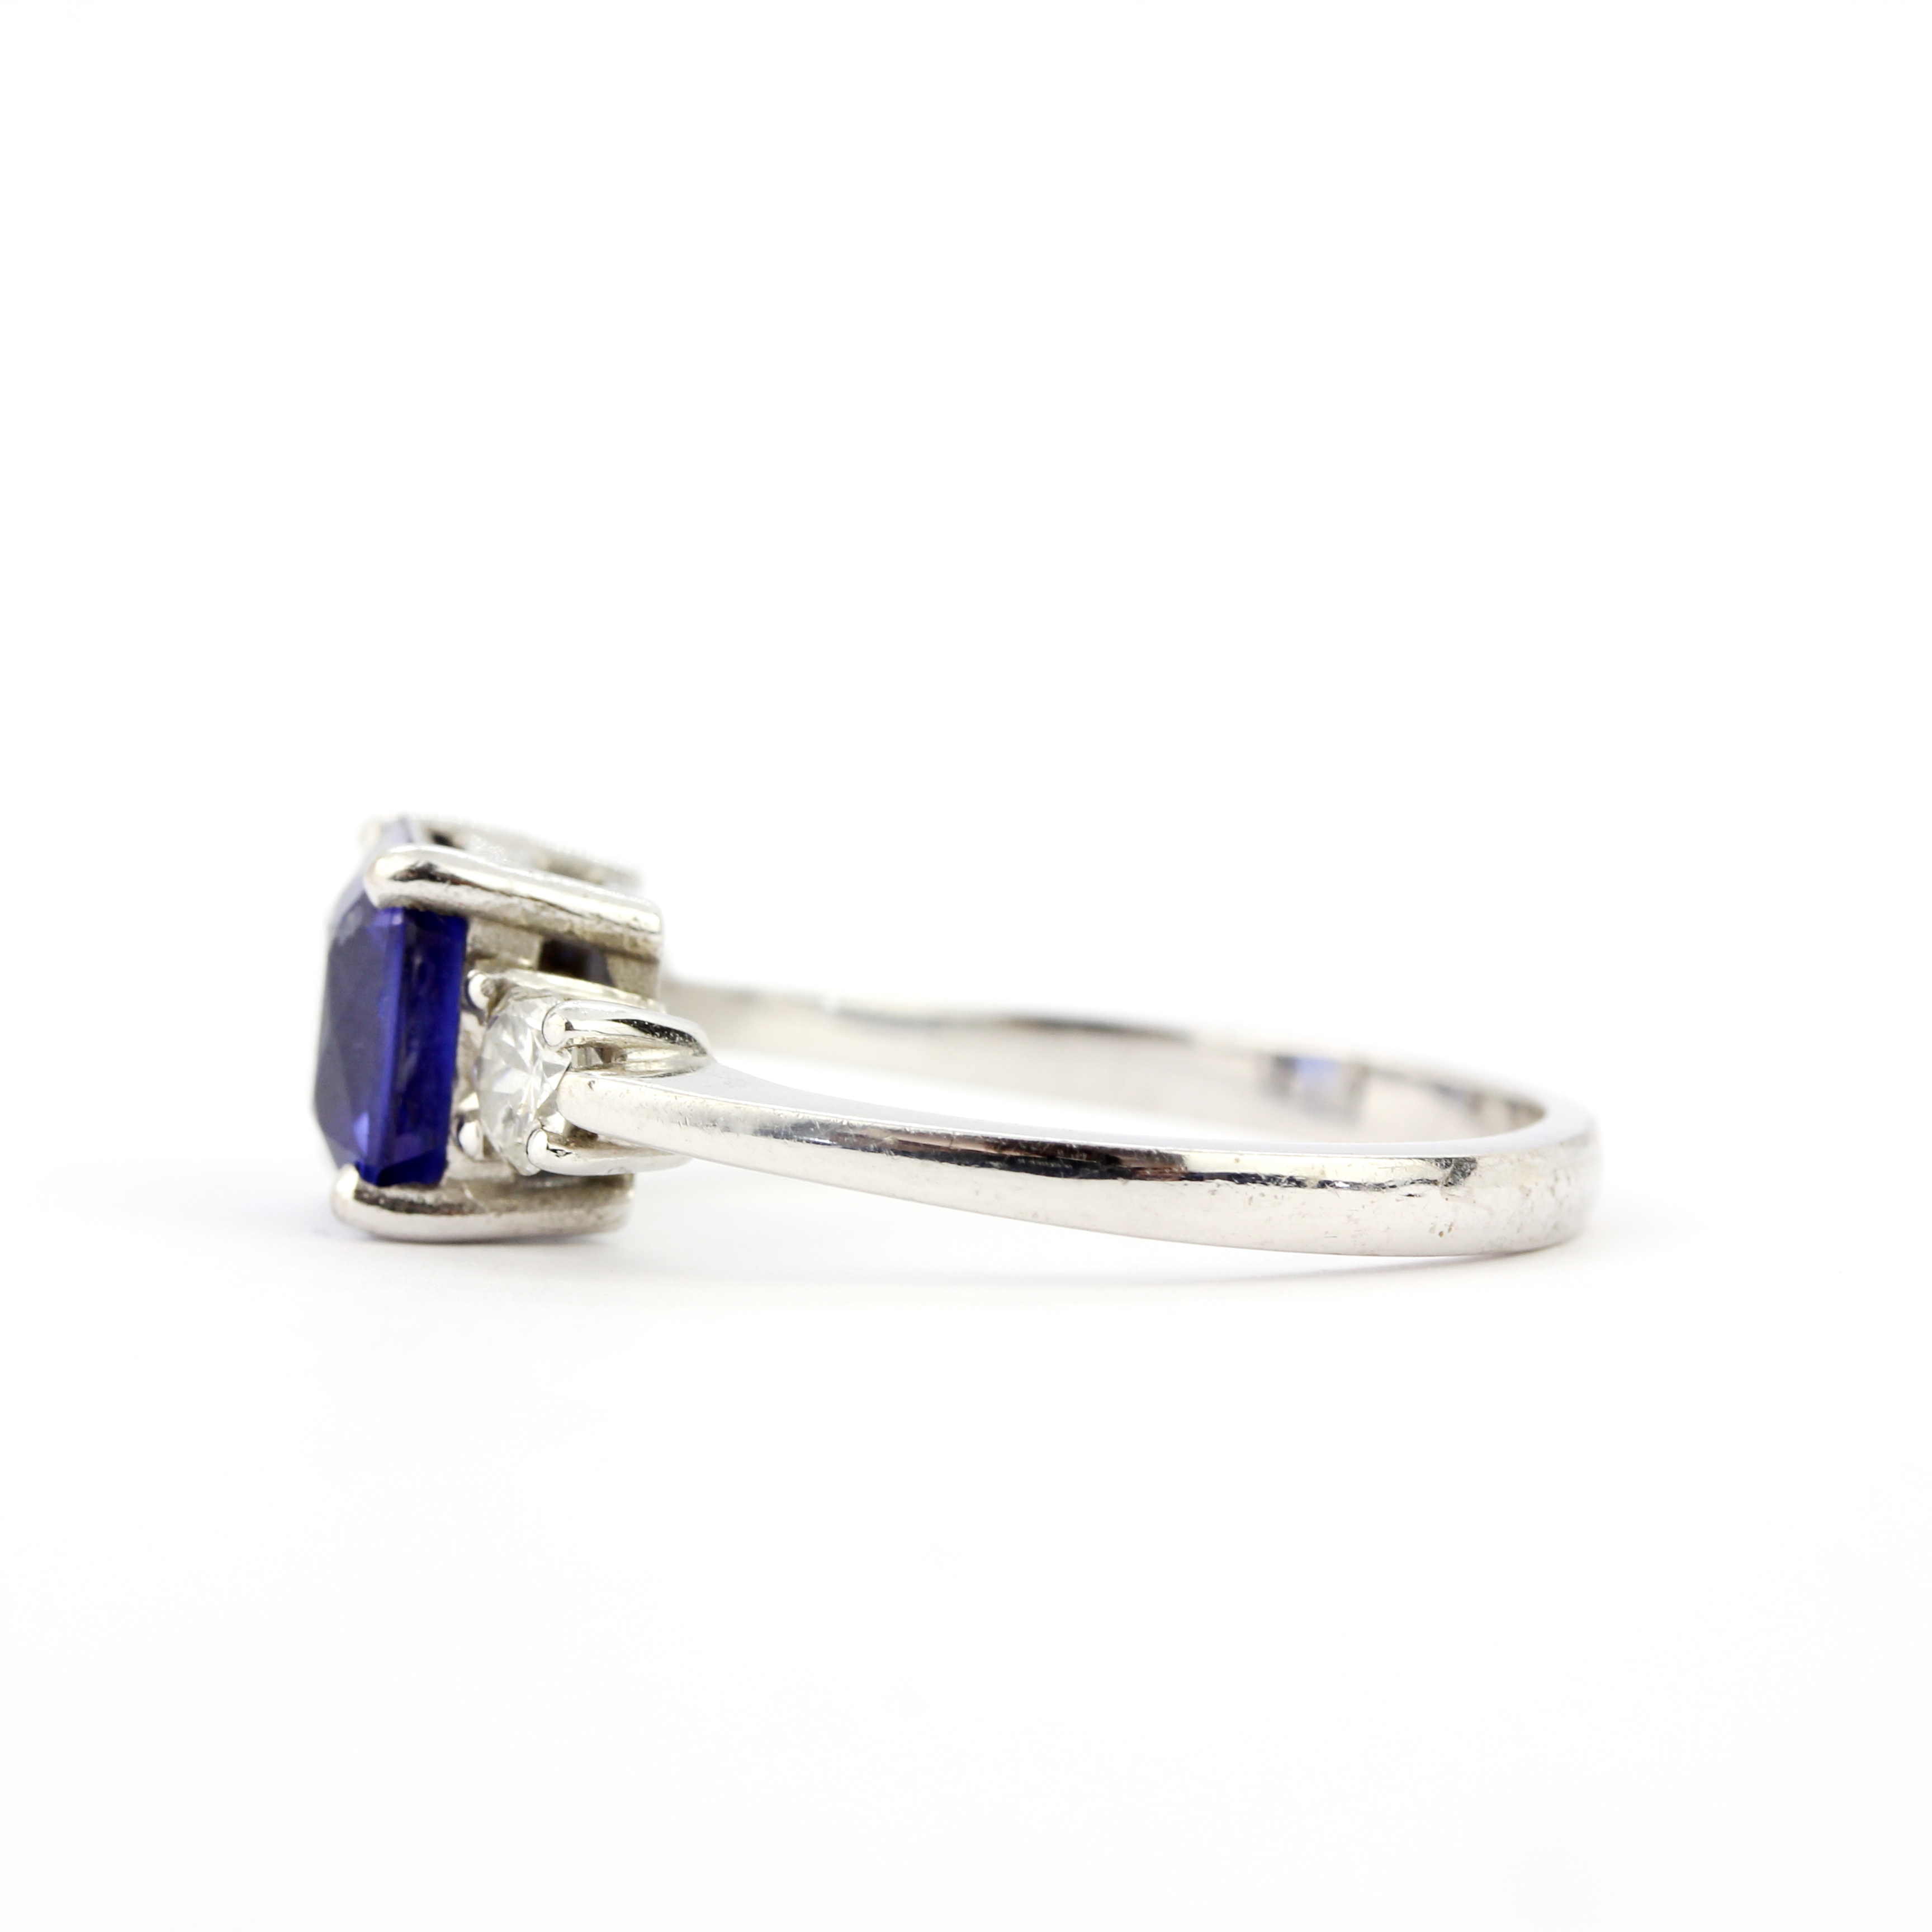 An 18ct white gold ring set with a fancy cut sapphire flanked by brilliant cut diamonds, diamonds - Image 4 of 4